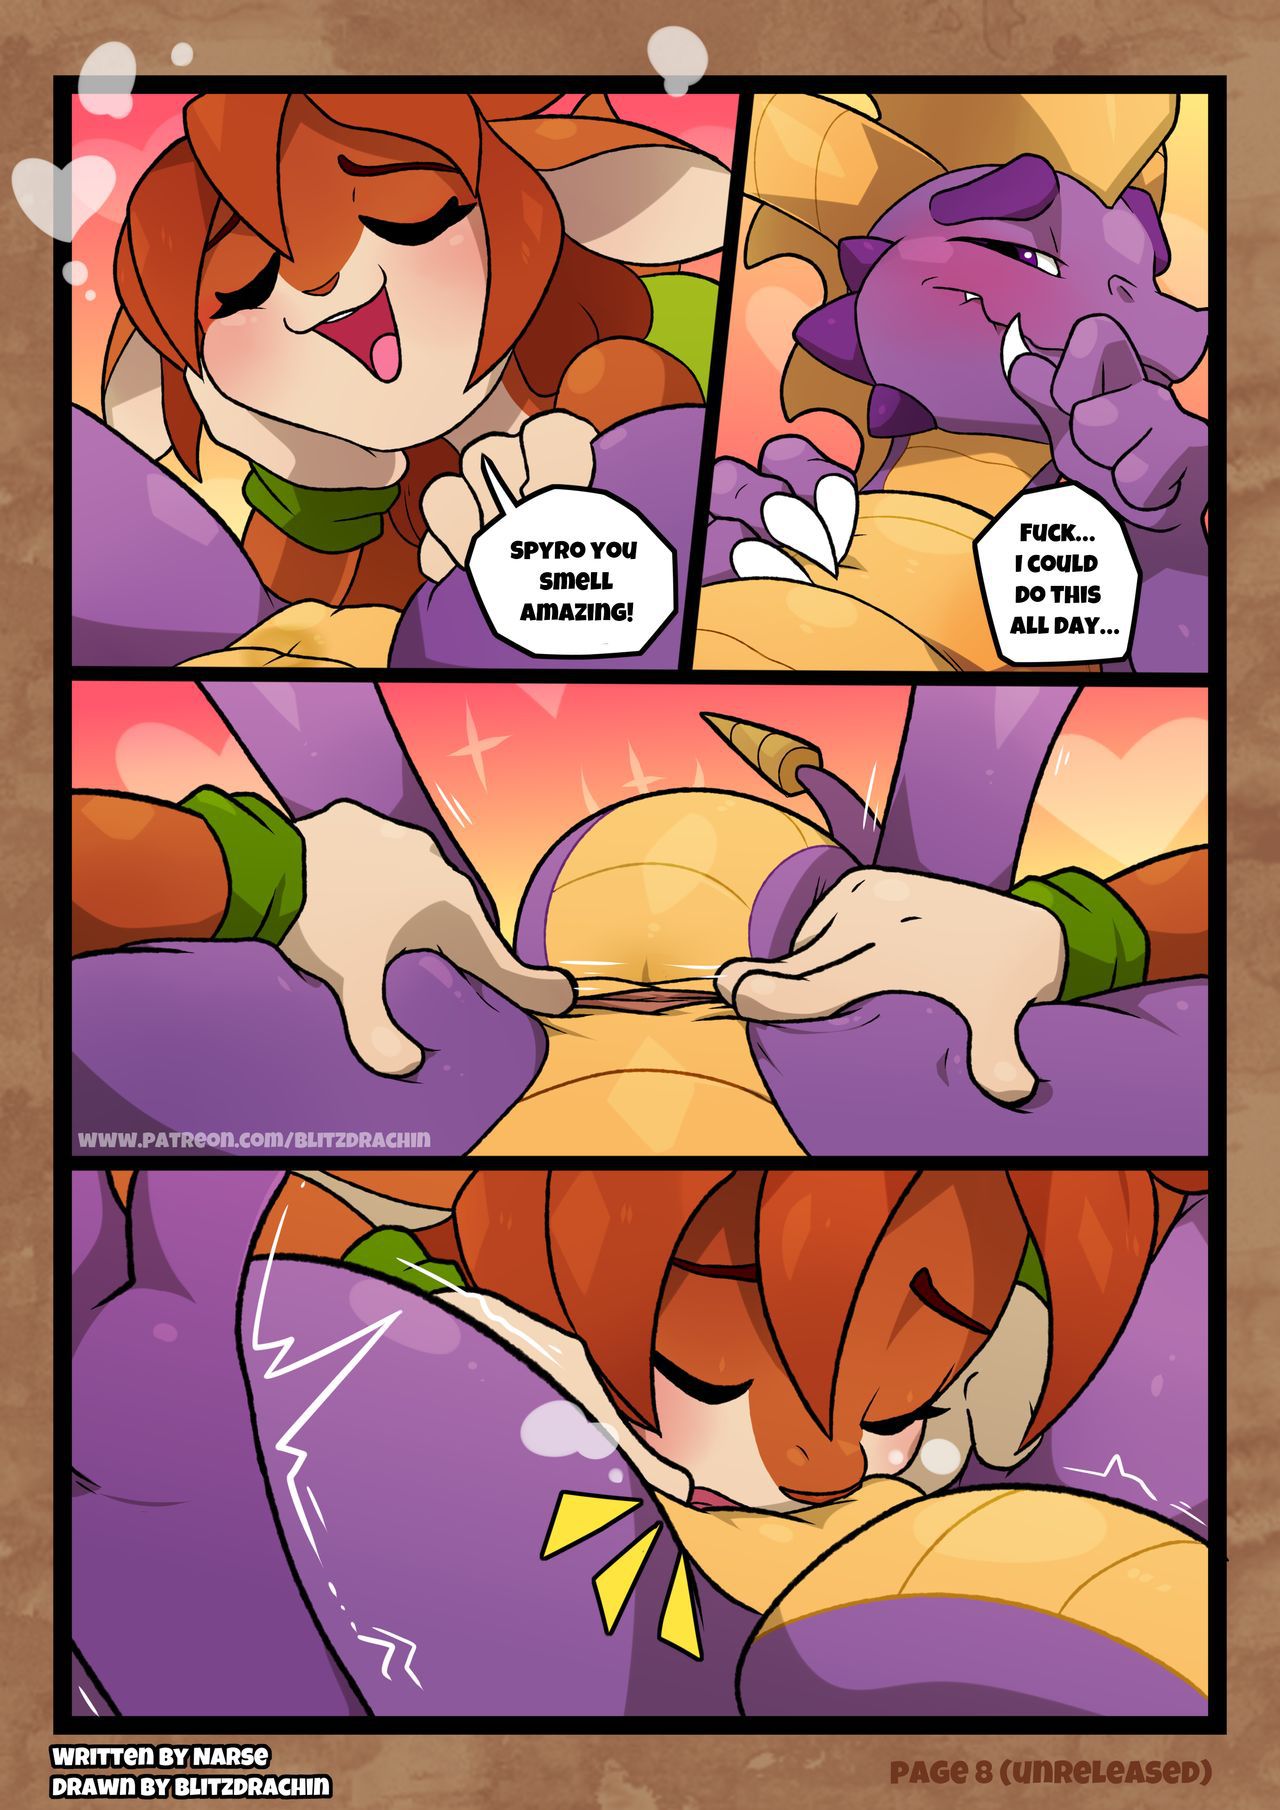 [Blitzdrachin] A Time with the Hero (Spyro the Dragon) [Ongoing] 10